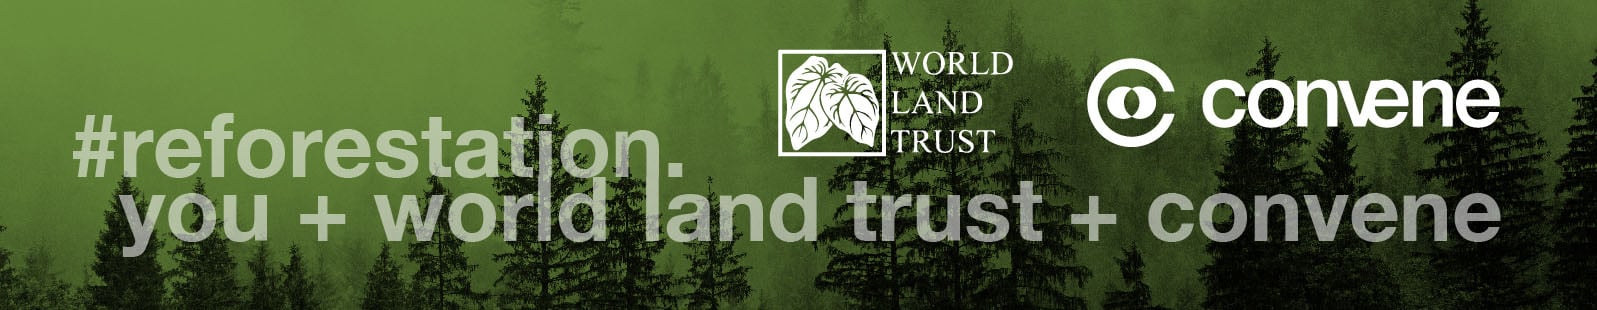 wlt-referral-tree-banner-1600x300